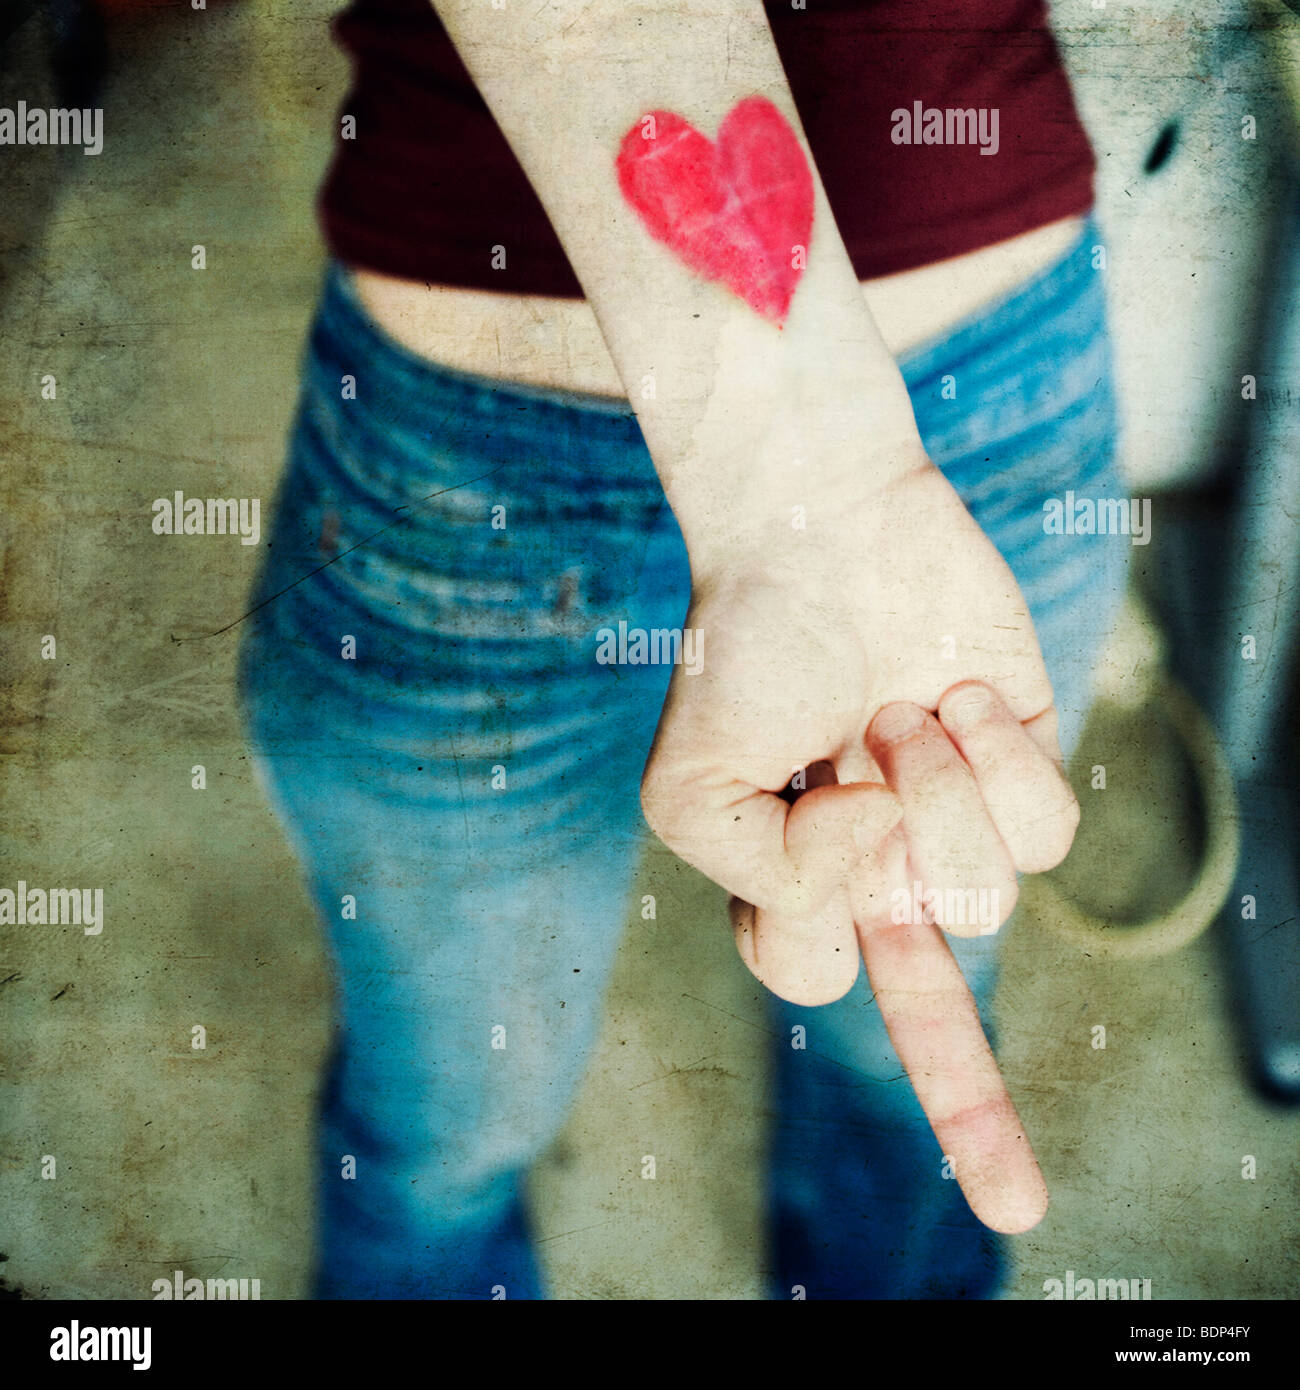 close-up of a woman's hand with a heart on her wrist Stock Photo